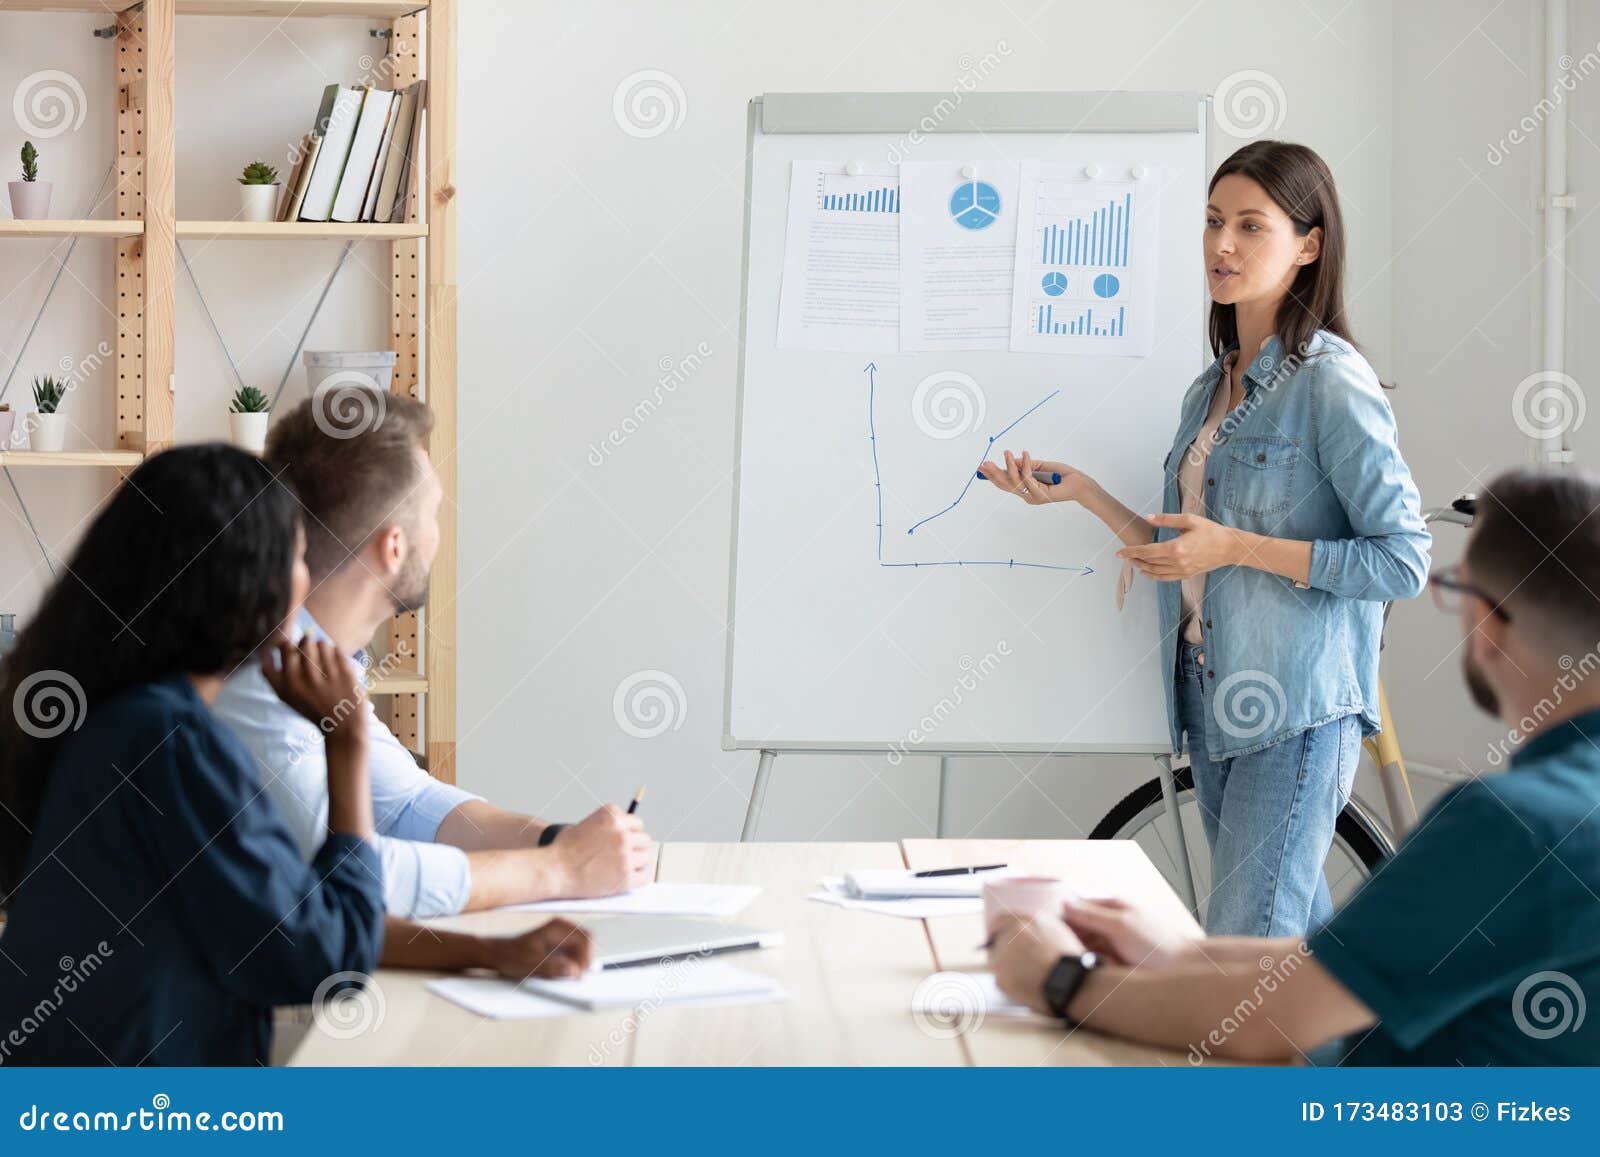 skilled female marketing specialist explaining research results to investors.